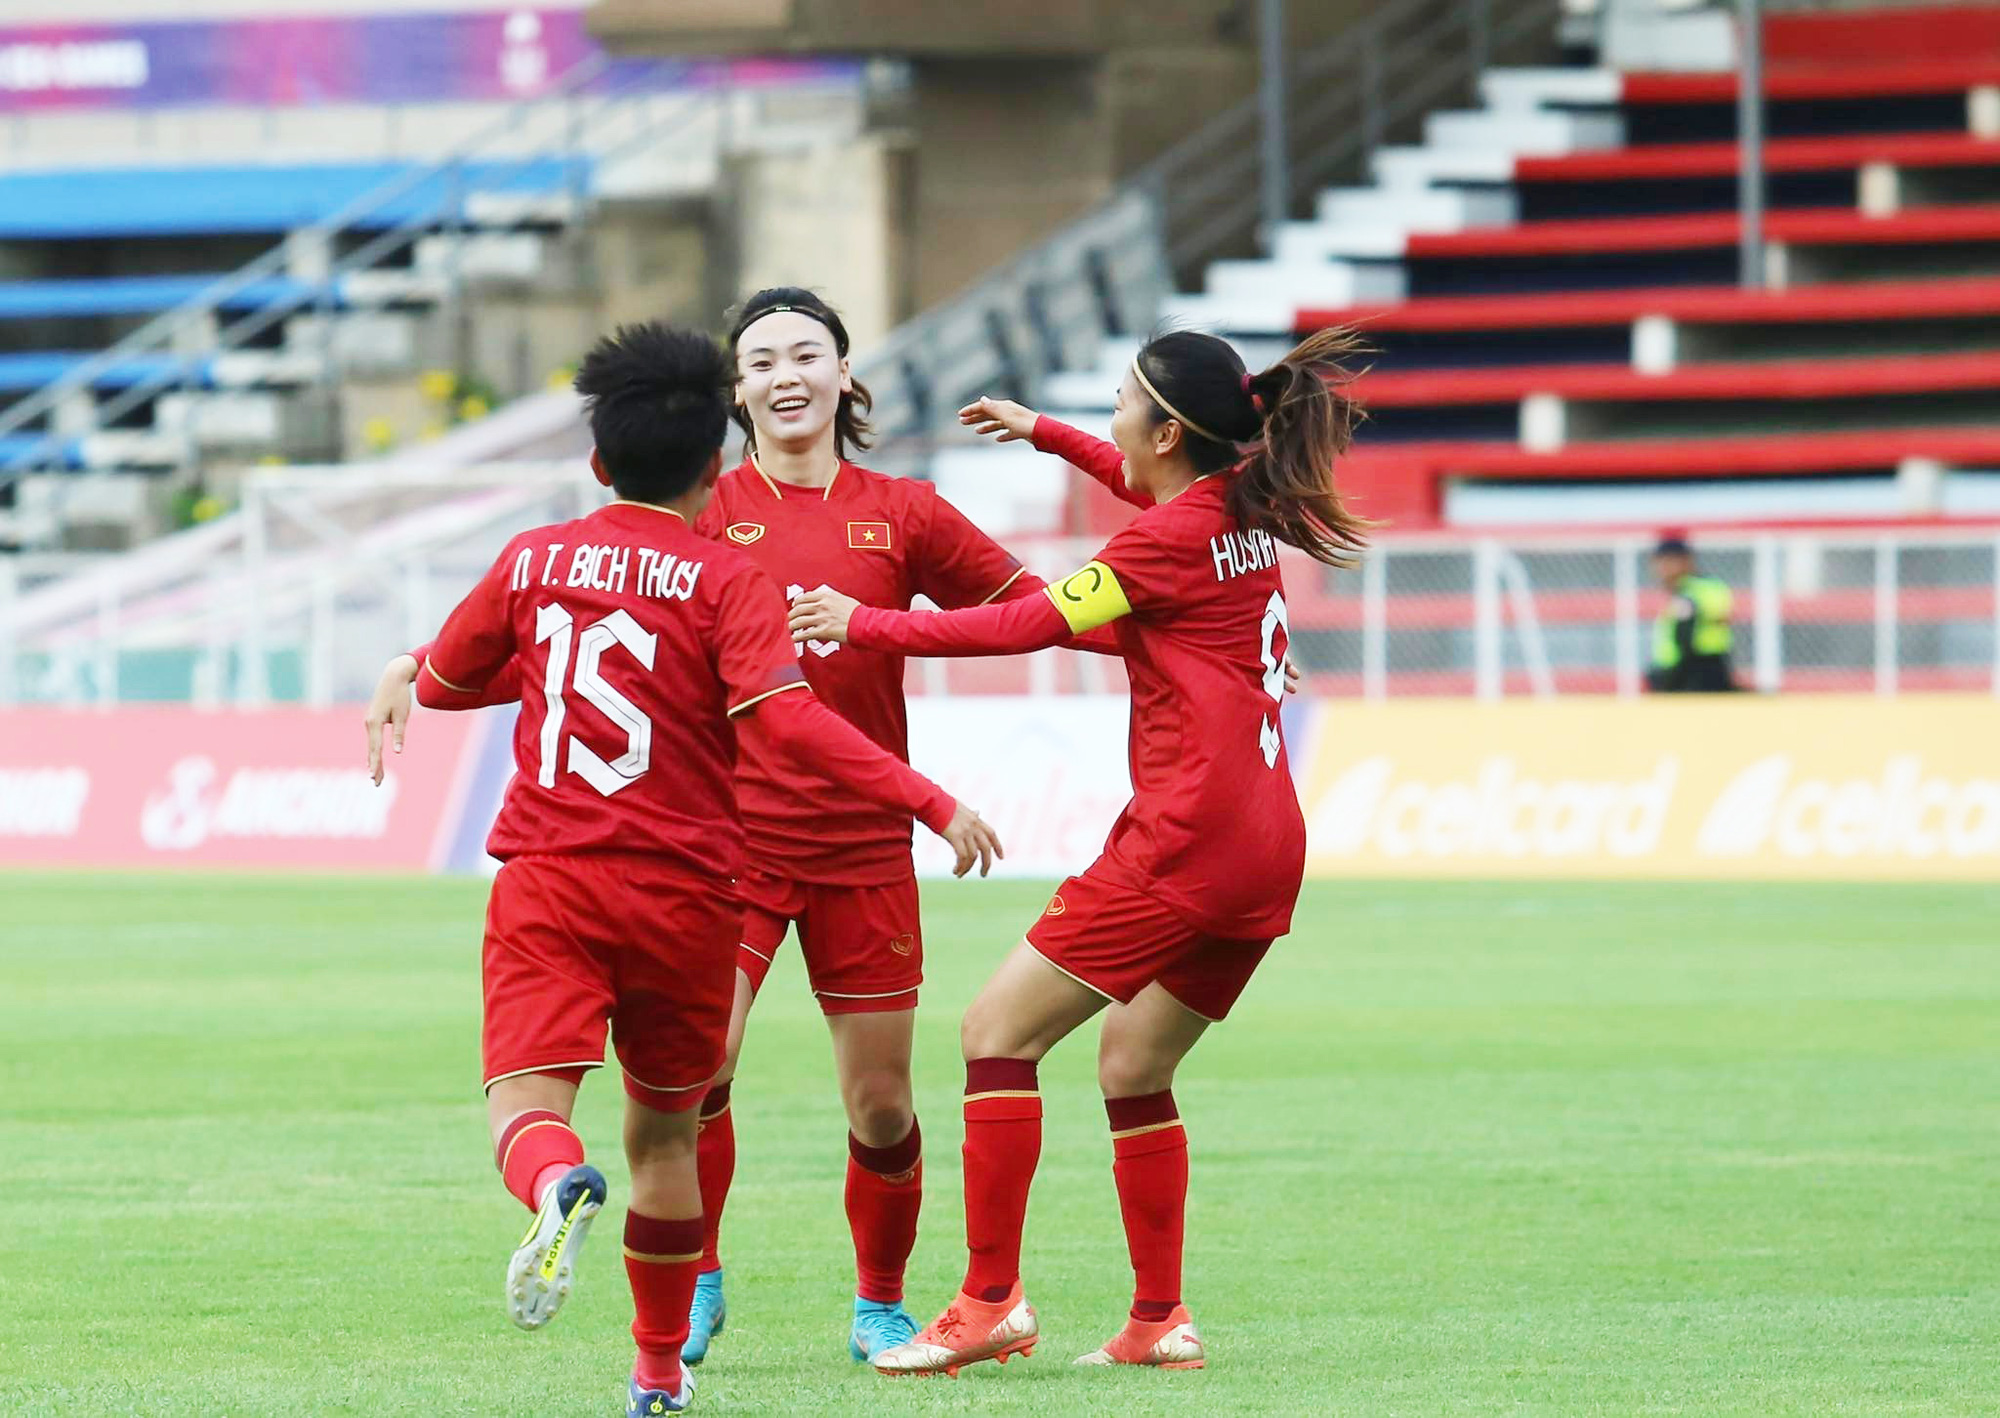 Vietnamese players celebrate a goal against Malaysia in women’s football at the 2023 SE Asian Games in Cambodia, May 3, 2023. Photo: Nguyen Khoi / Tuoi Tre